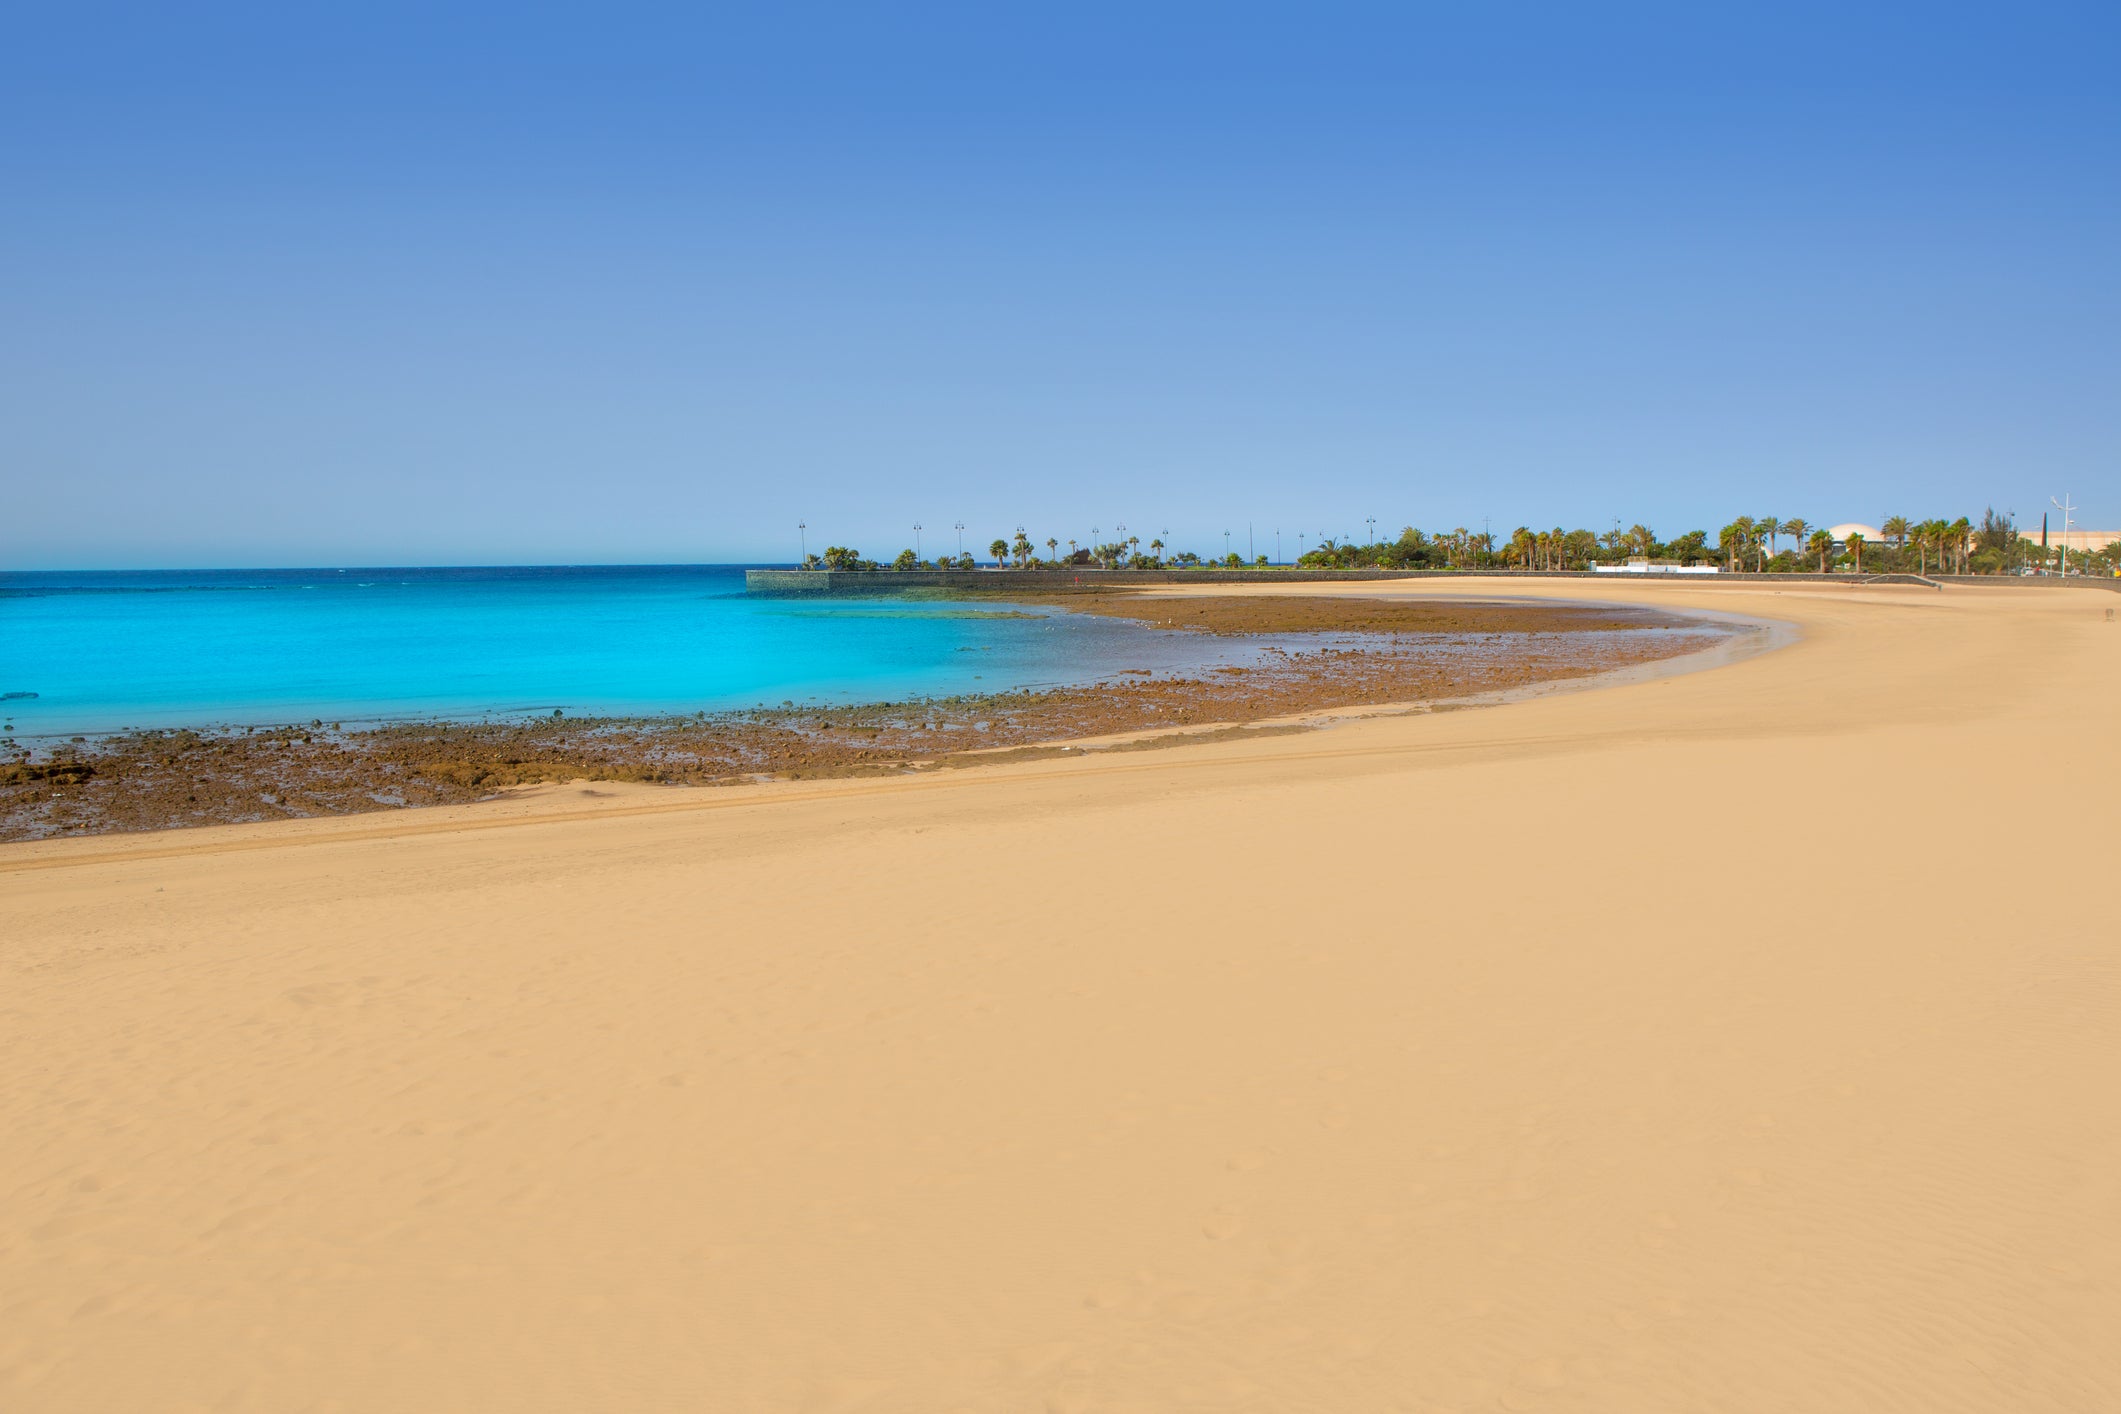 Playa del Reducto features turquoise waters and the Blue Flag status to match